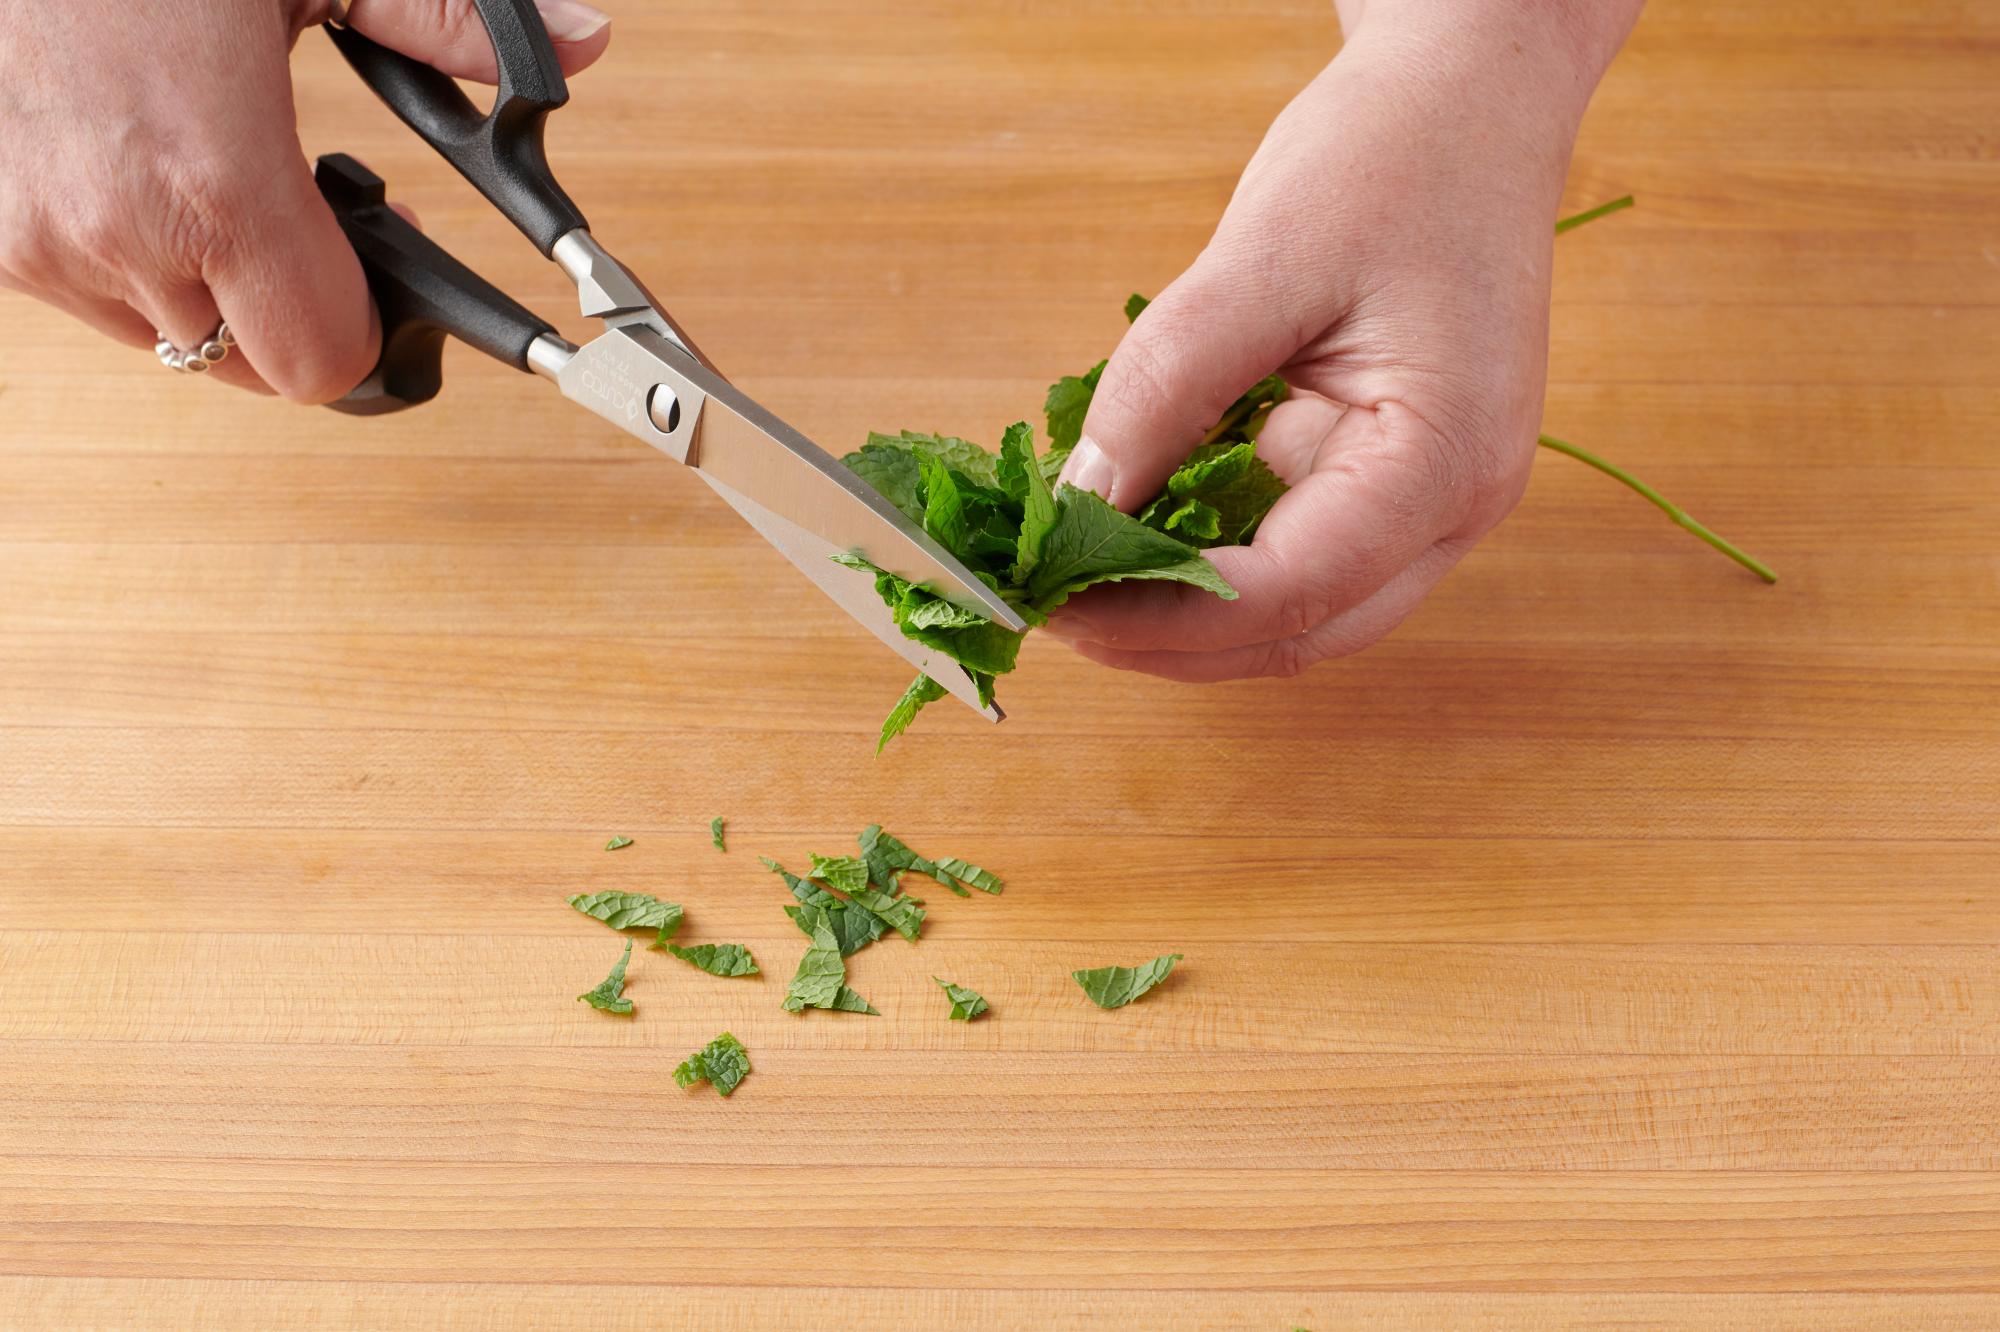 Snipping mint with Super Shears.